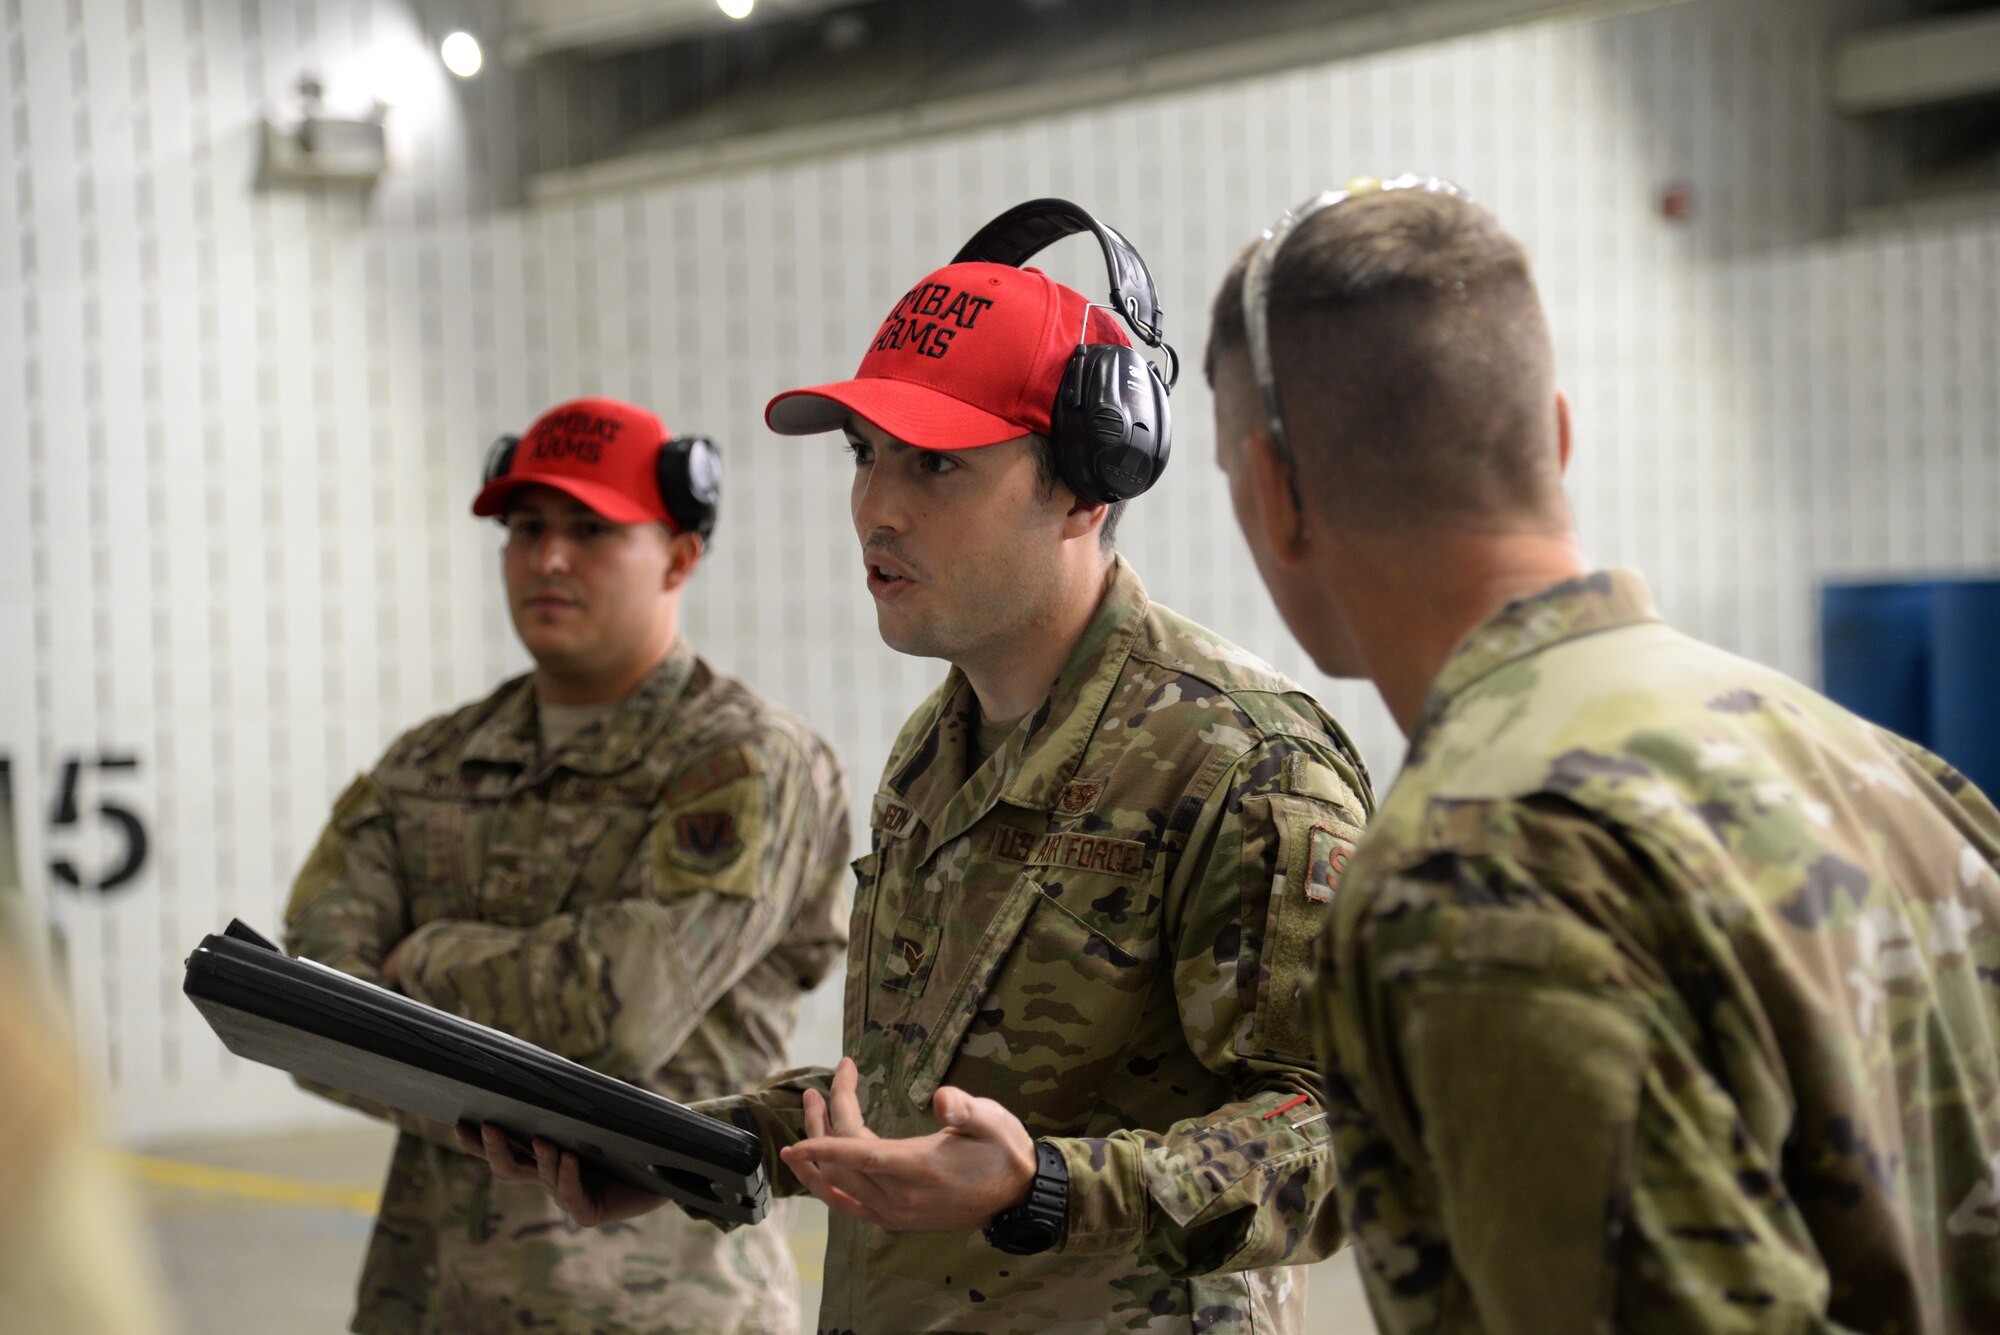 A picture of U.S. Air Force Senior Airman Zachary Ferguson, an Airman with the 177th Fighter Wing Security Forces Squadron, talking to the wing commander and group commanders of the 177FW.